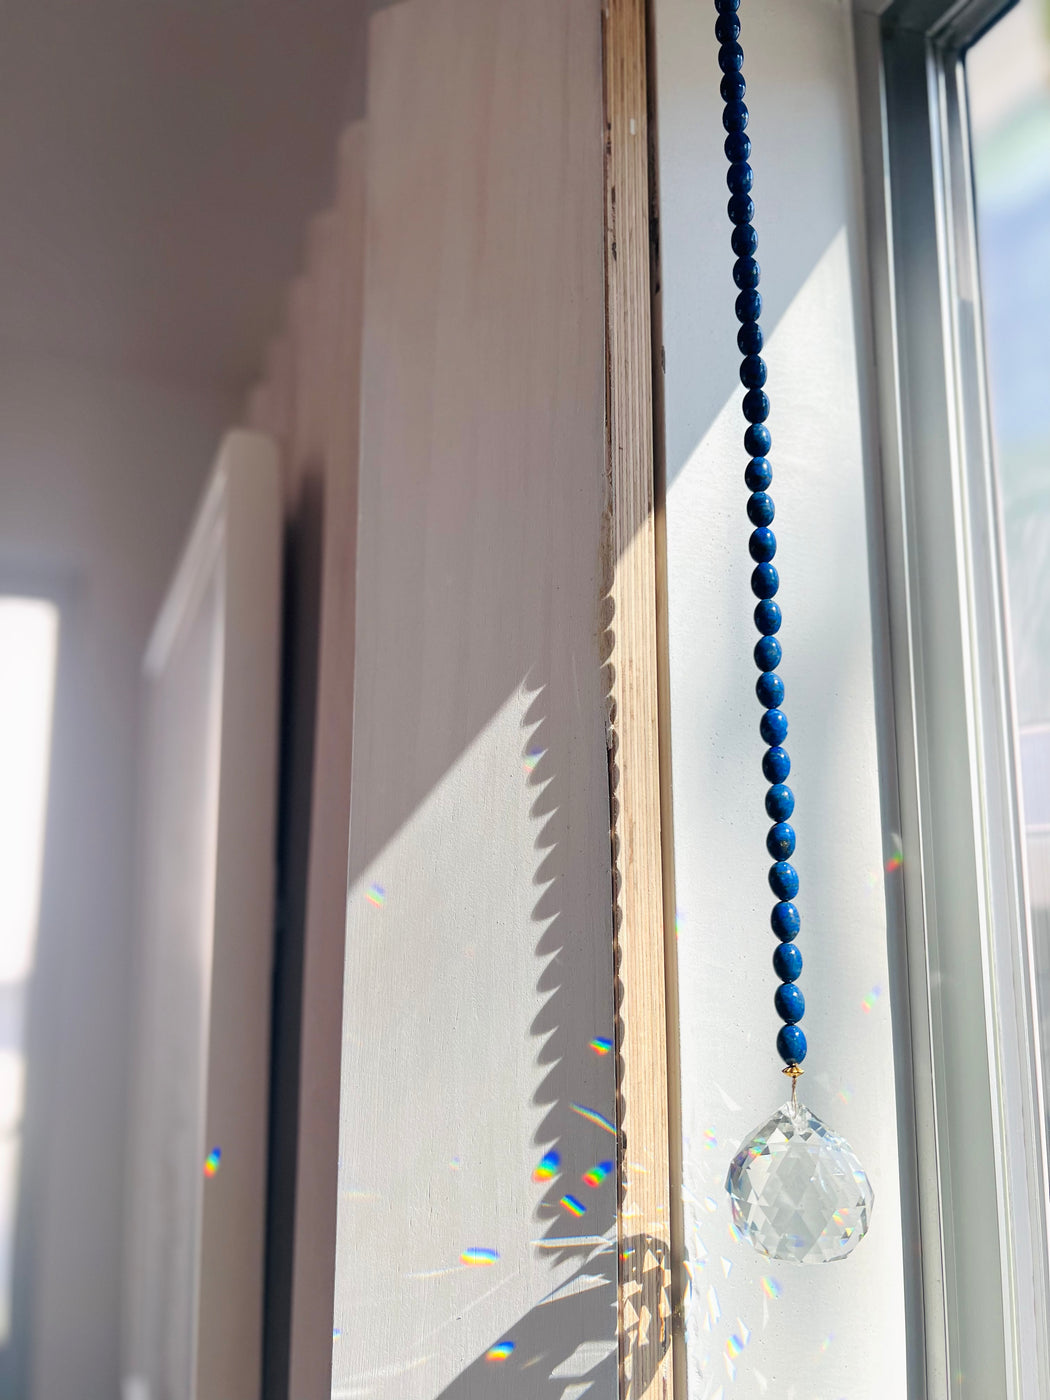 Lapis Lazuli window prism transforms any space into a zen den - hang in a sunny spot & watch the rainbows dance!  Third eye activating Lapis Lazuli clears out the BS so you can benefit the most from your meditations. Designed in California by Carrie Marill and made by hand in her SoCal studio.